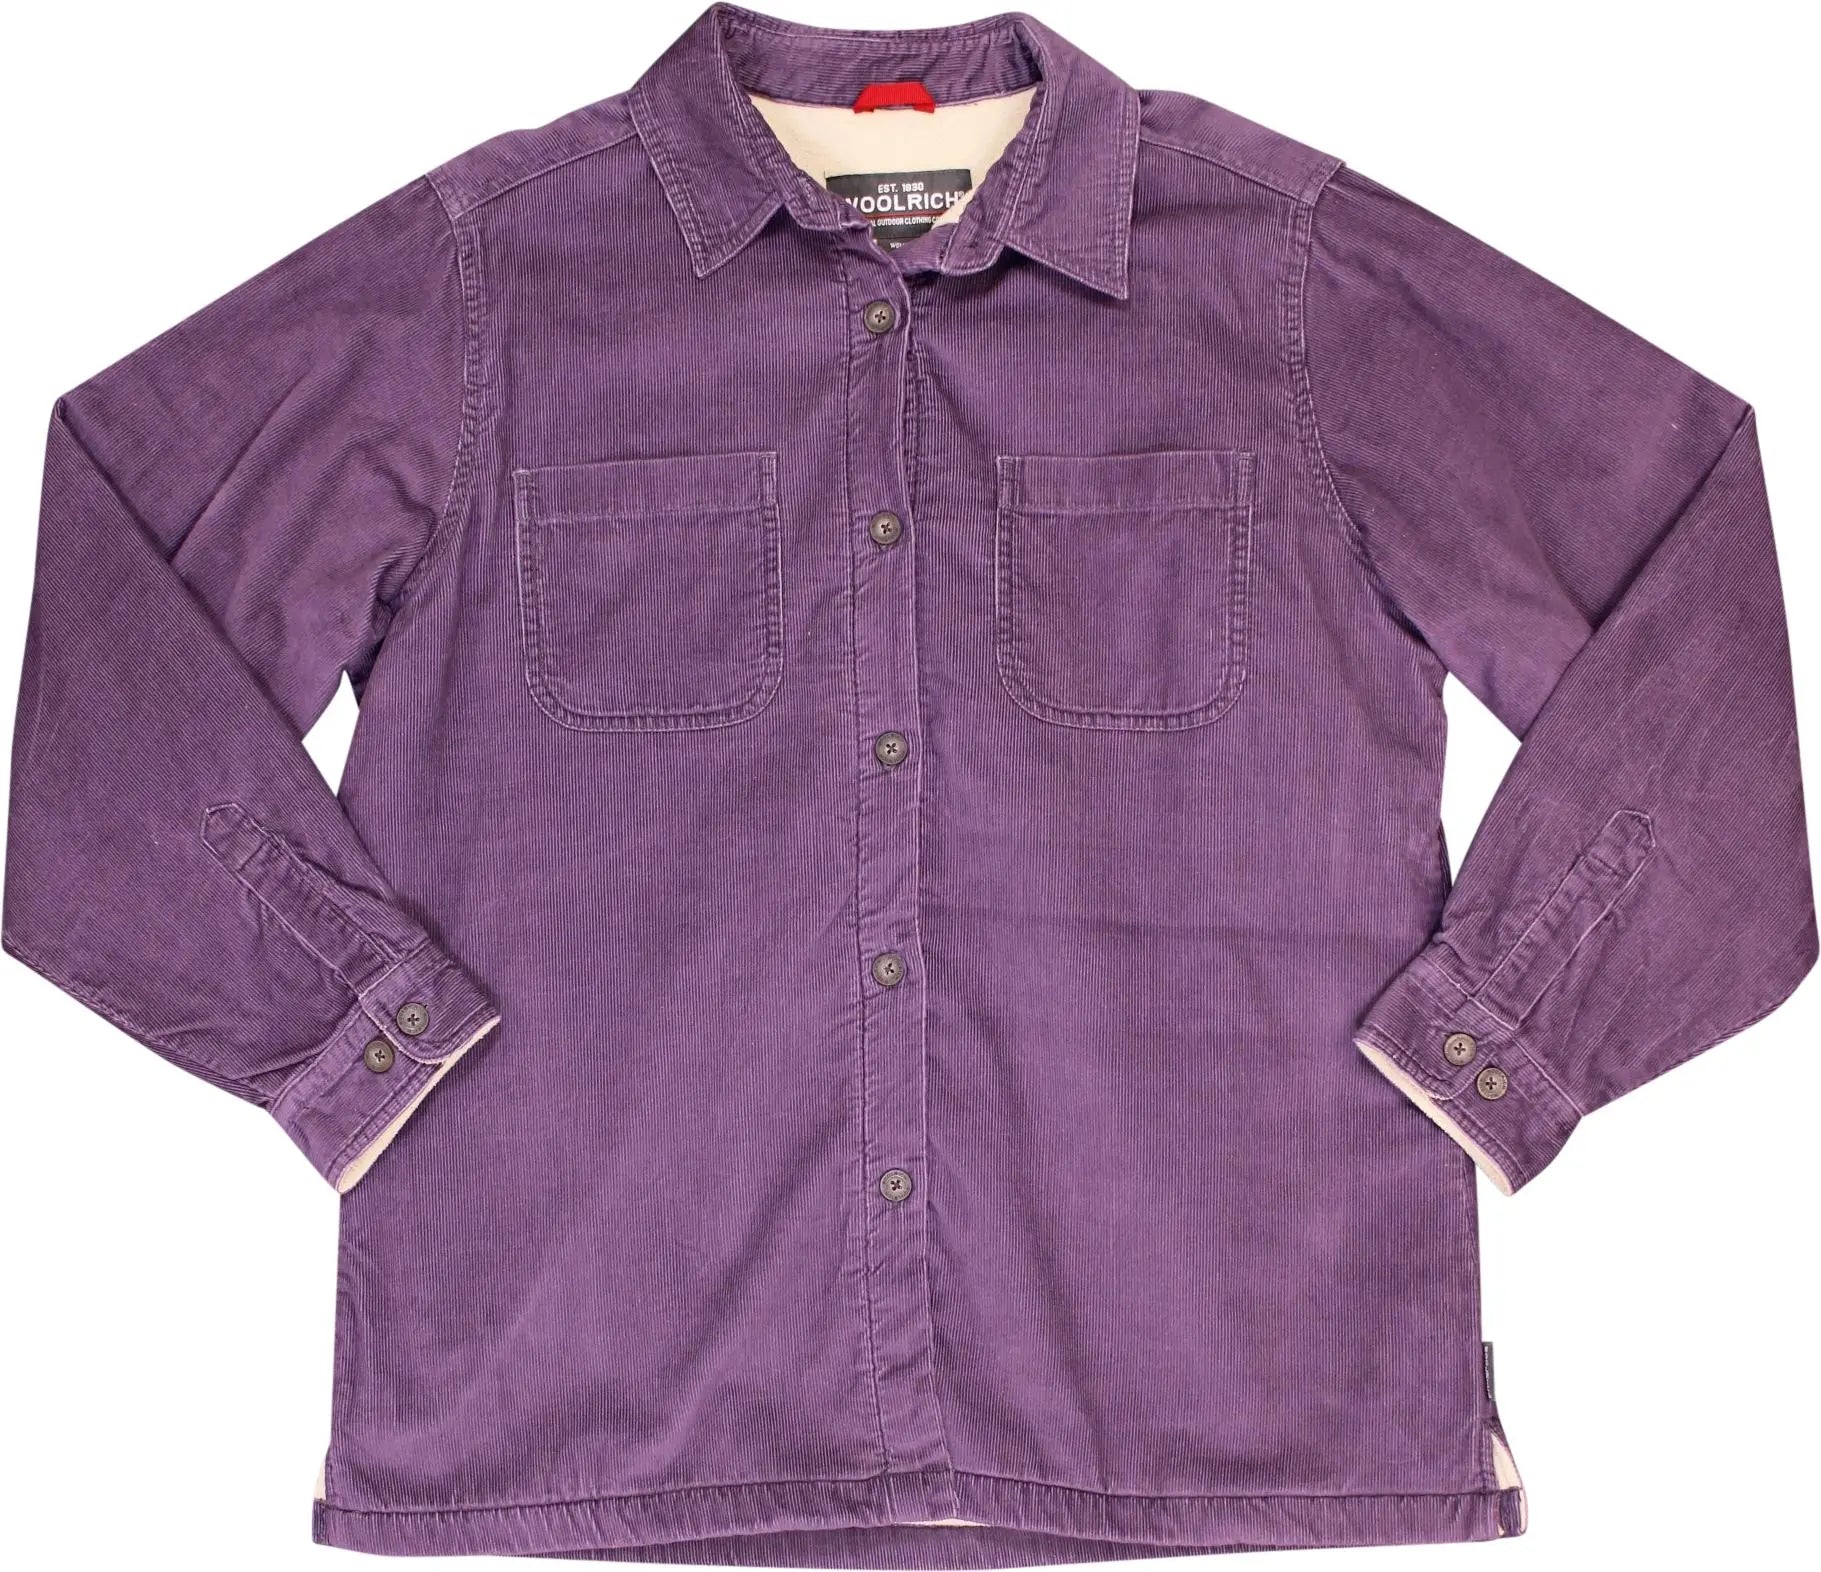 Woolrich - Purple Corduroy Jacket by Woolrich- ThriftTale.com - Vintage and second handclothing